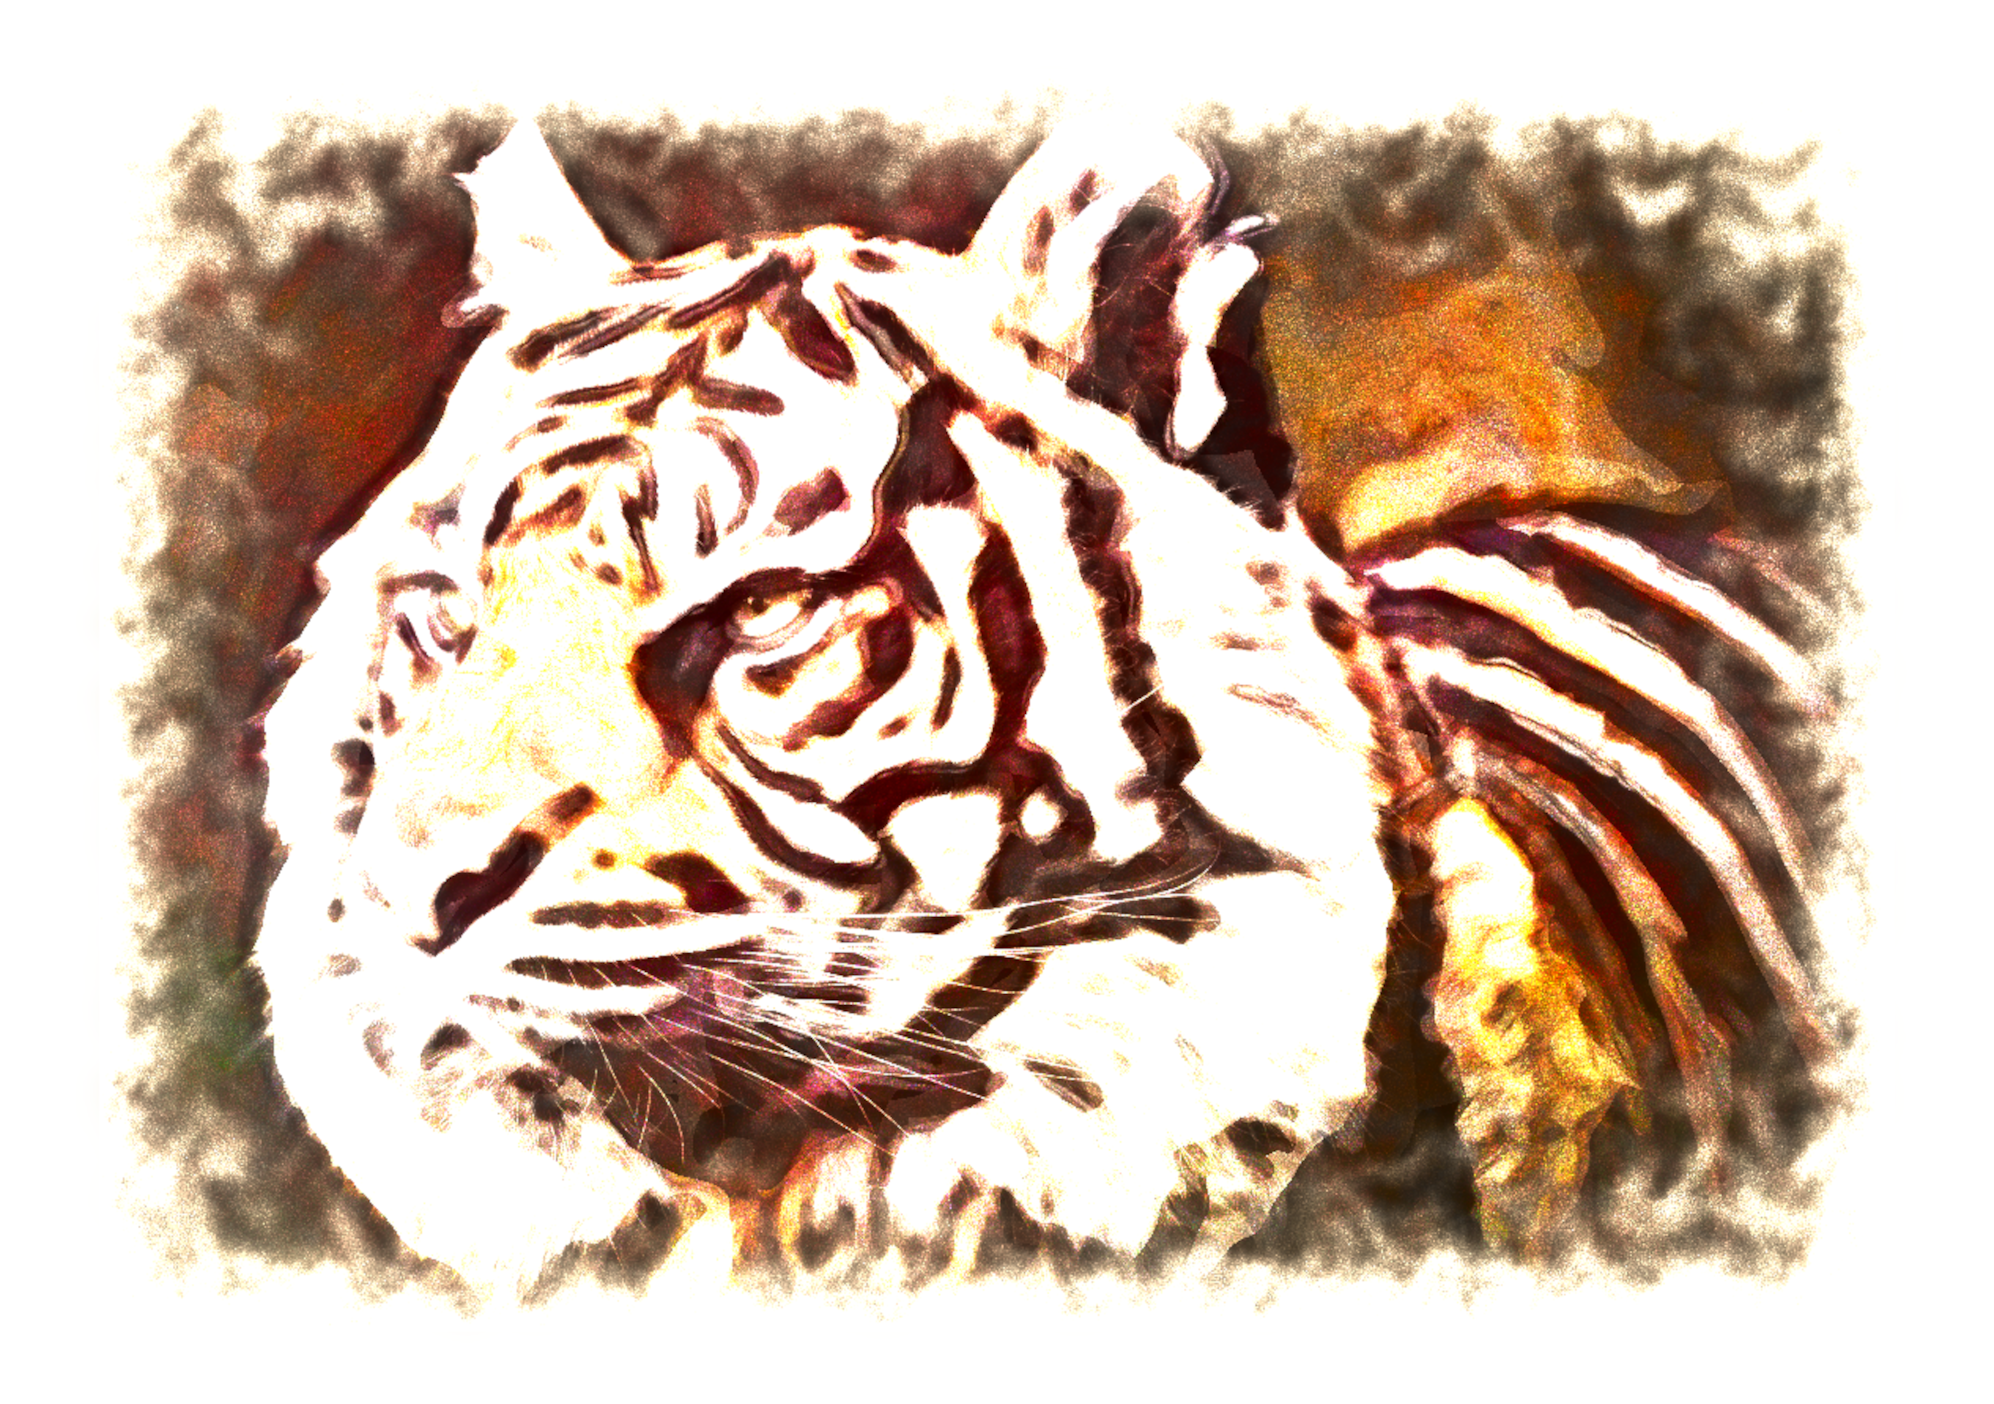 2023-09-29 15-37-41 tiger-8214815 with a Watercolor Pastels Effect 2023 (4.0,75.0,32.0,50.0,20.0,8.0,75.0,False,1).png